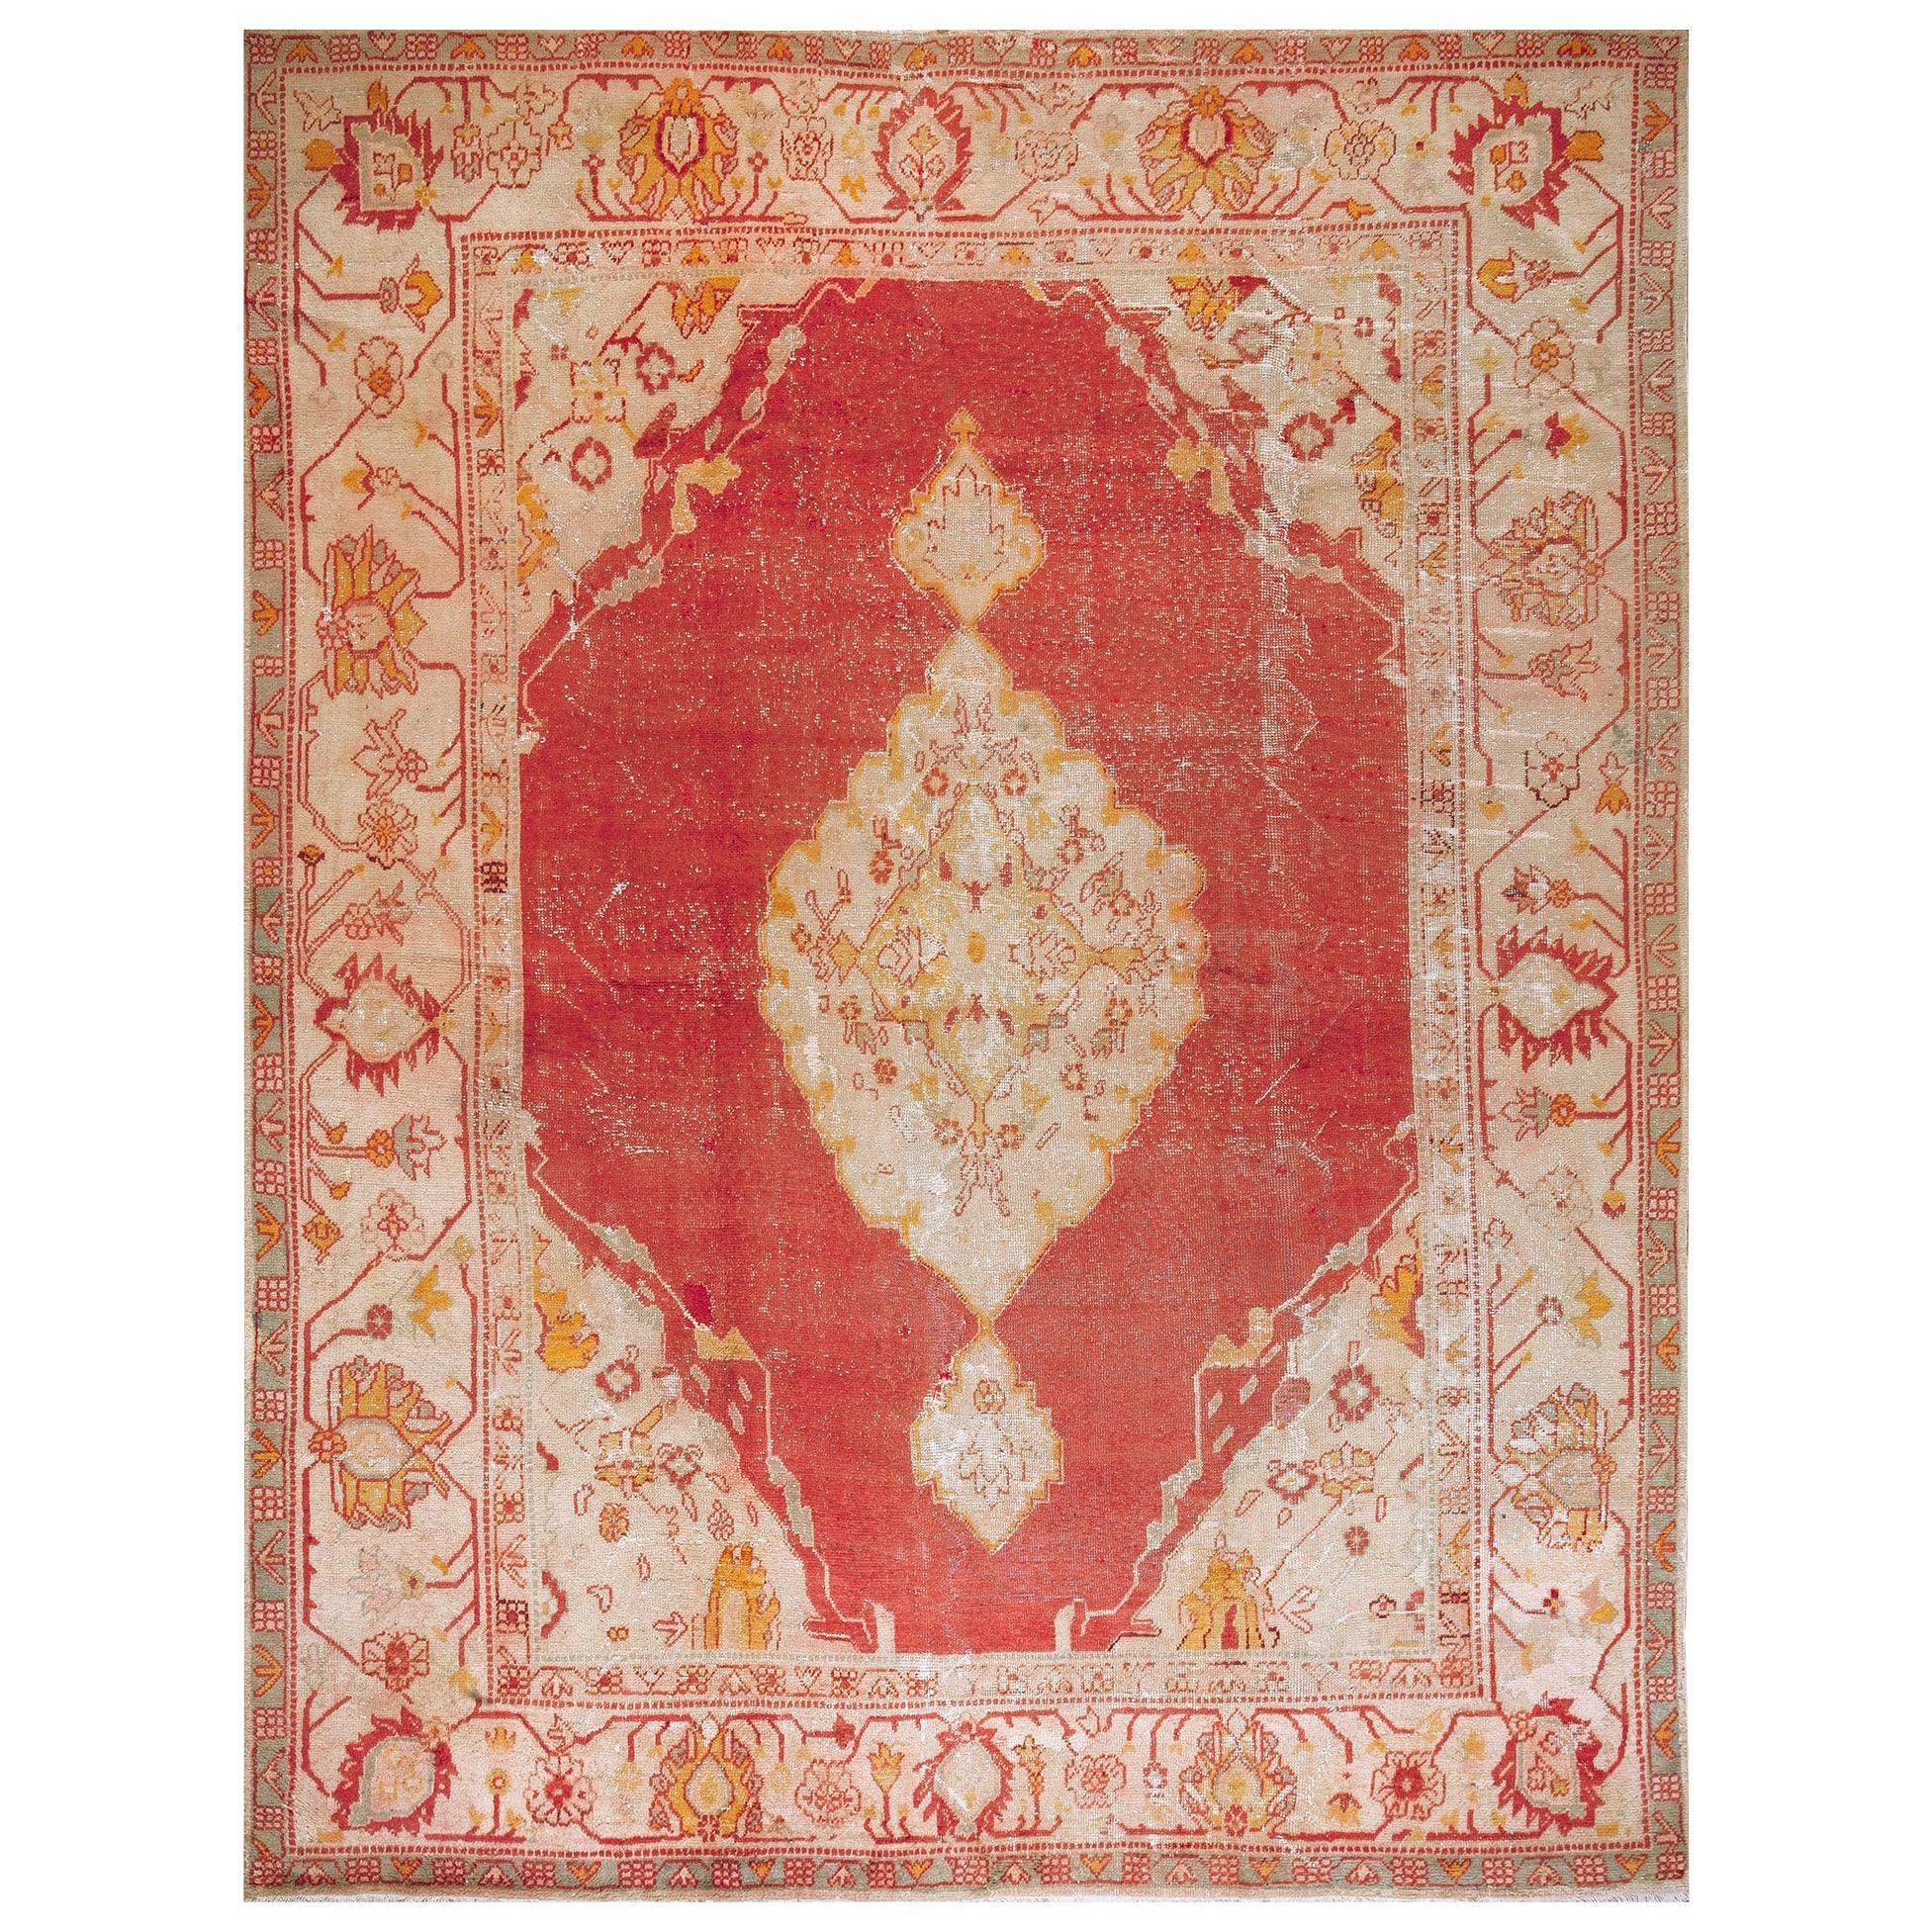 Early 20th Century Turkish Oushak Carpet ( 10' x 13' - 304 x 396 cm )  For Sale